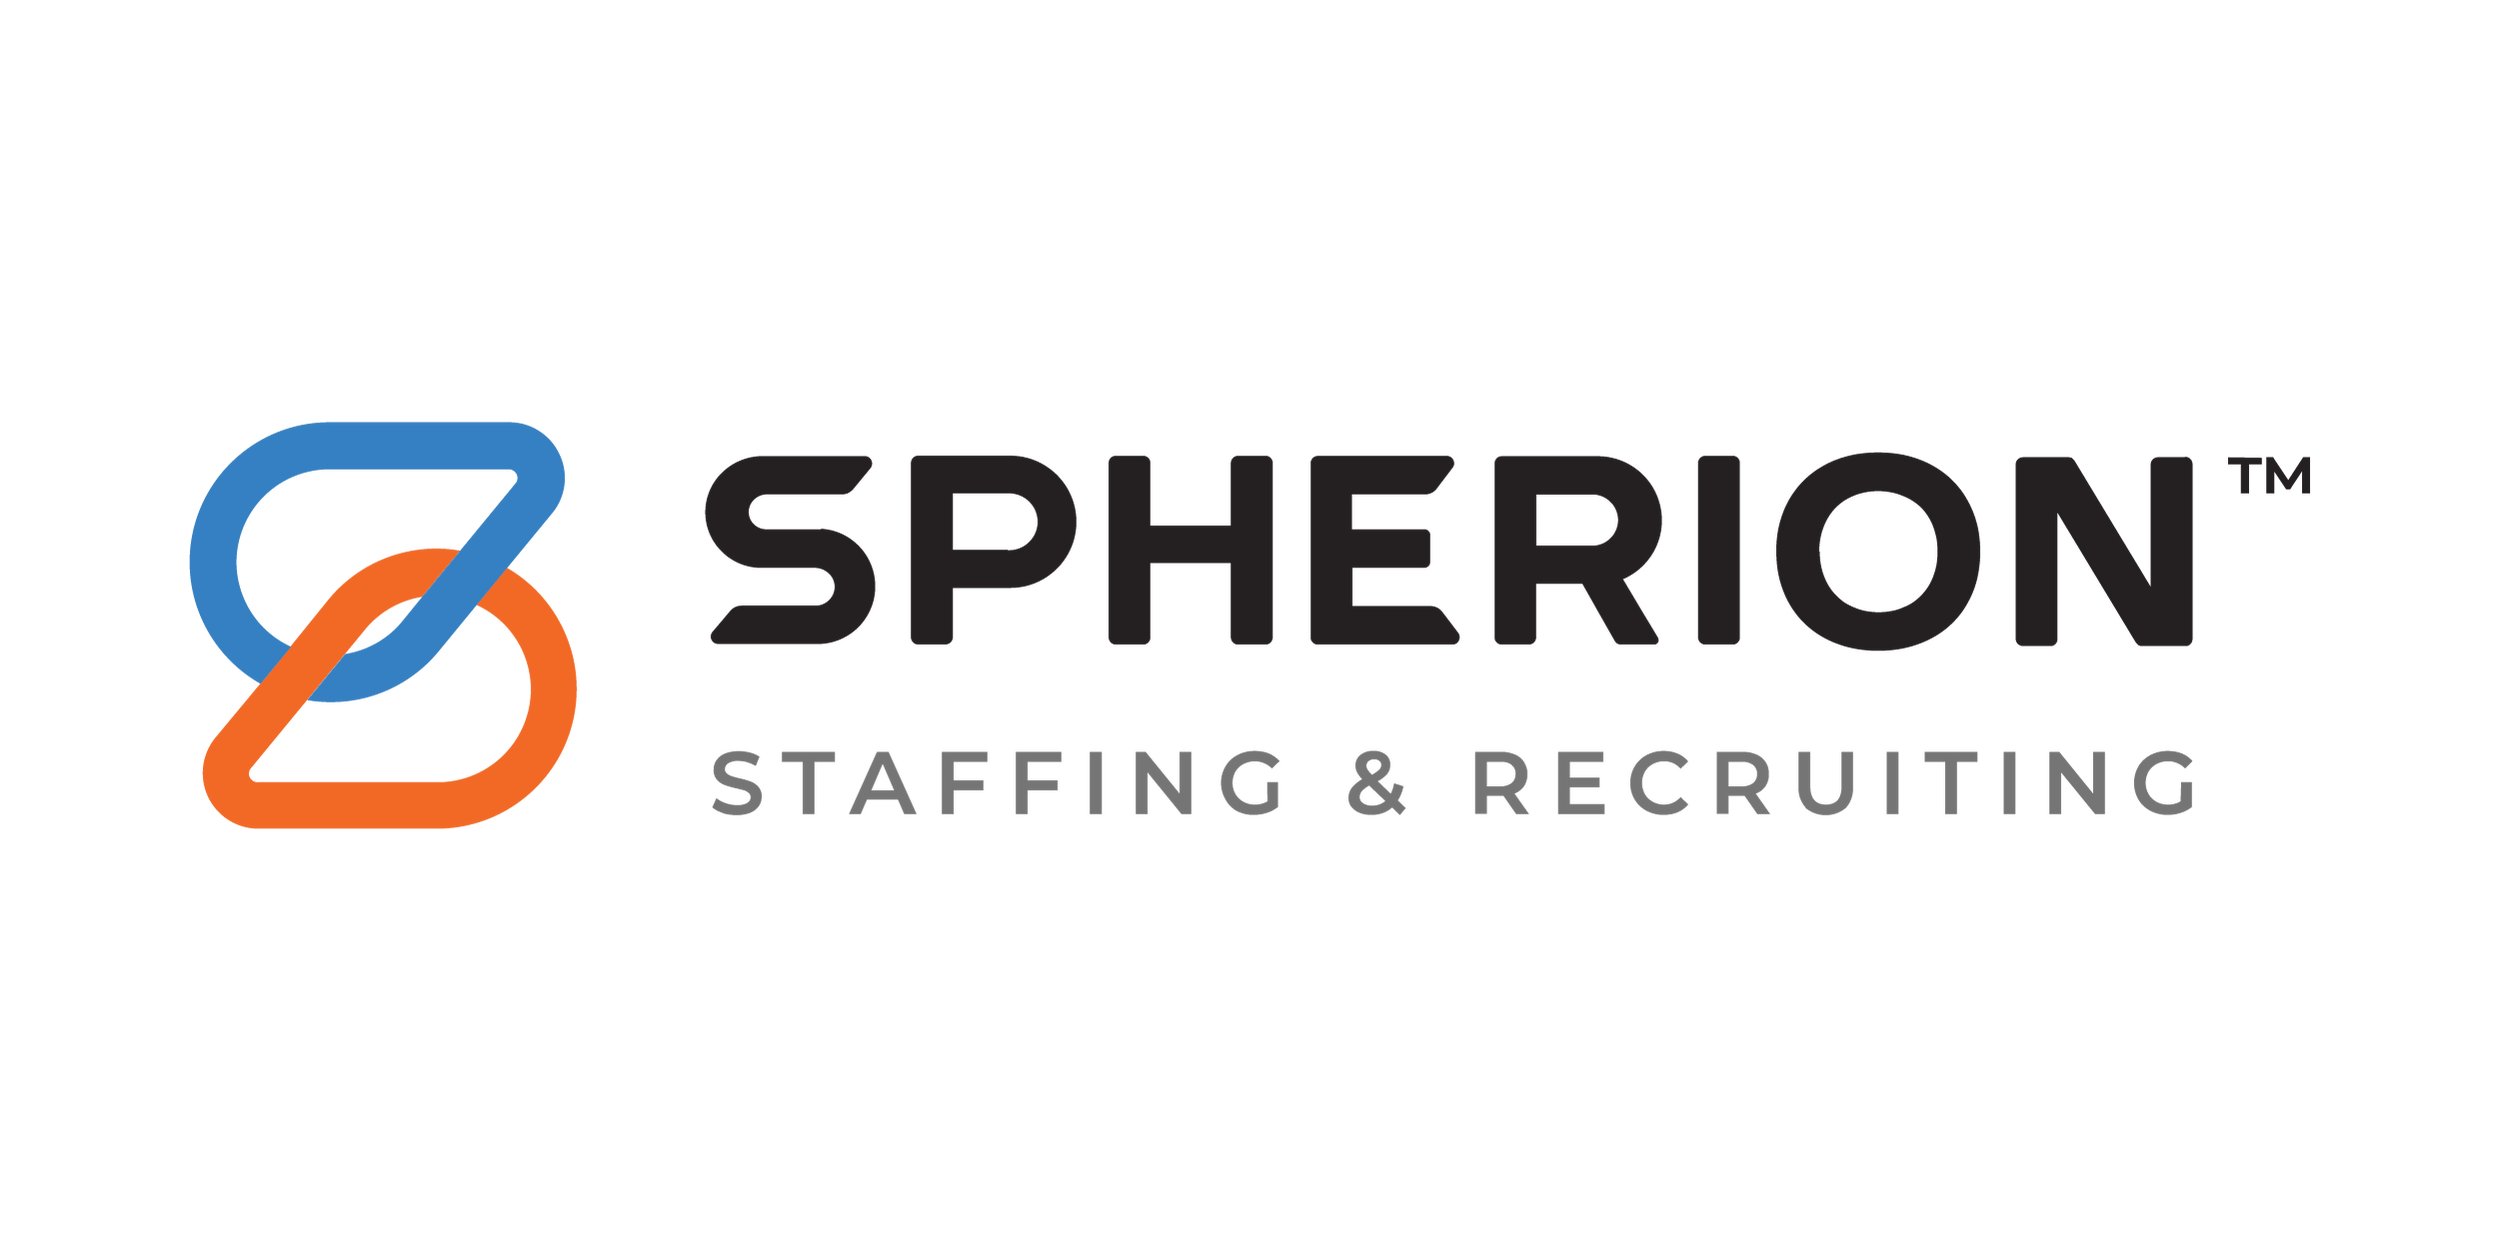 Spherion Staffing and Recruiting is empowering its franchisees and igniting change